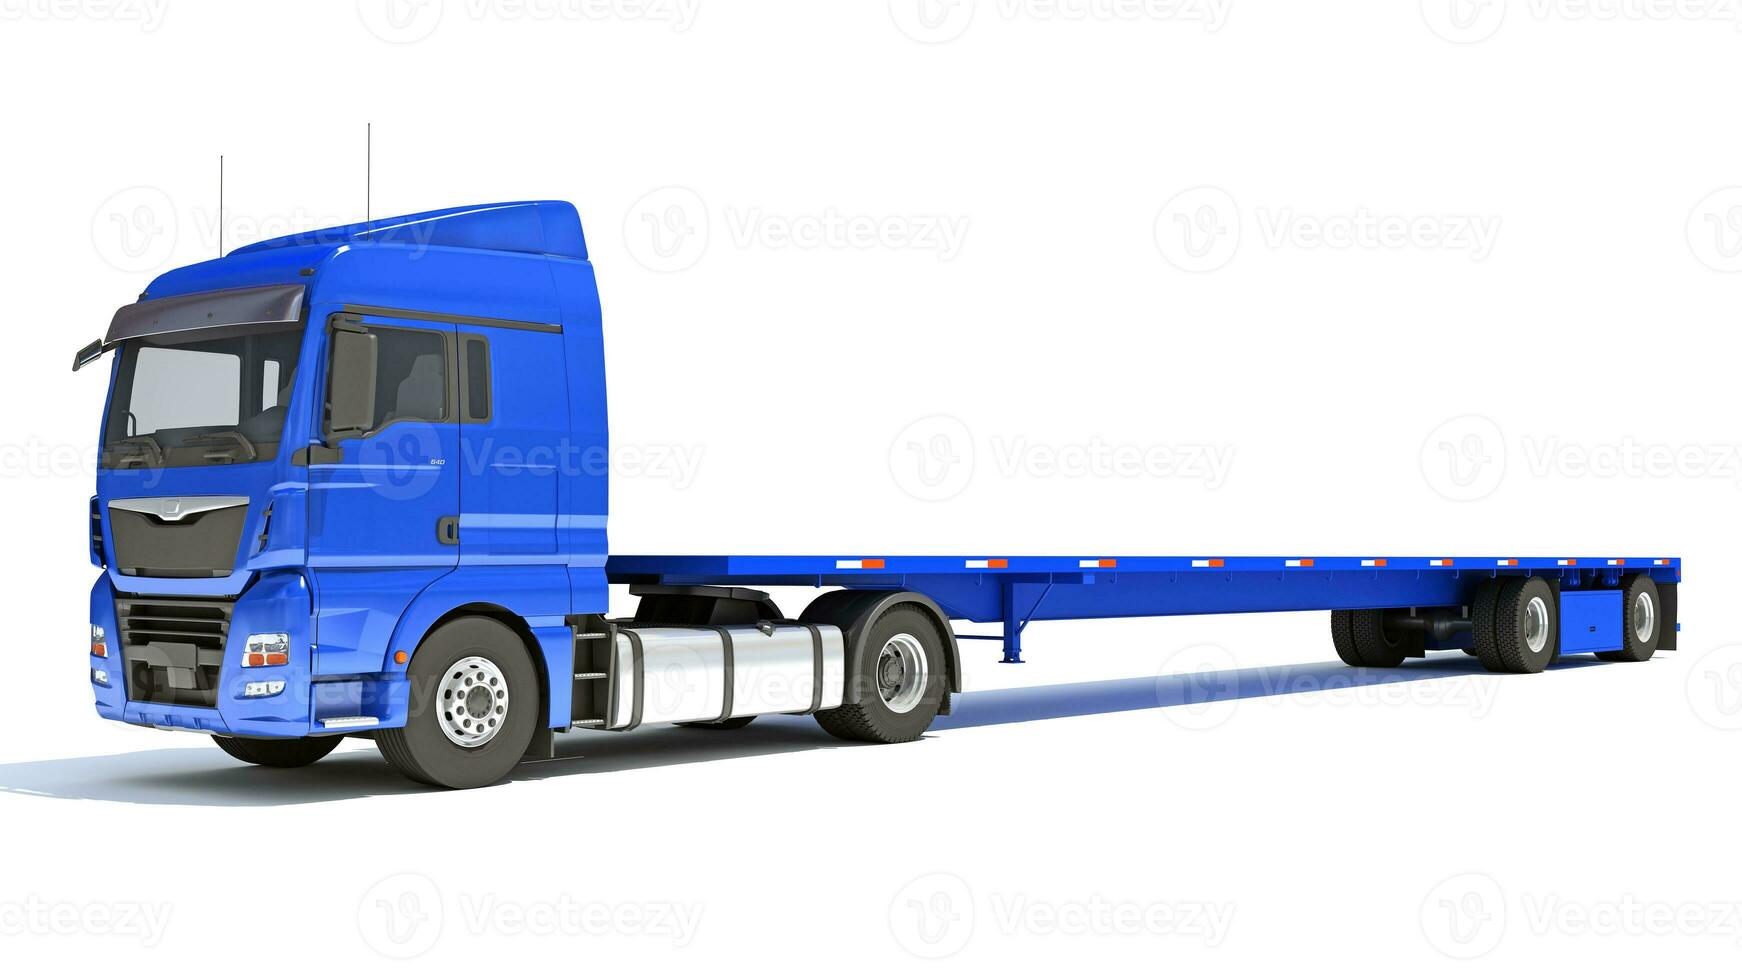 Heavy Truck with Lowboy Trailer 3D rendering on white background photo